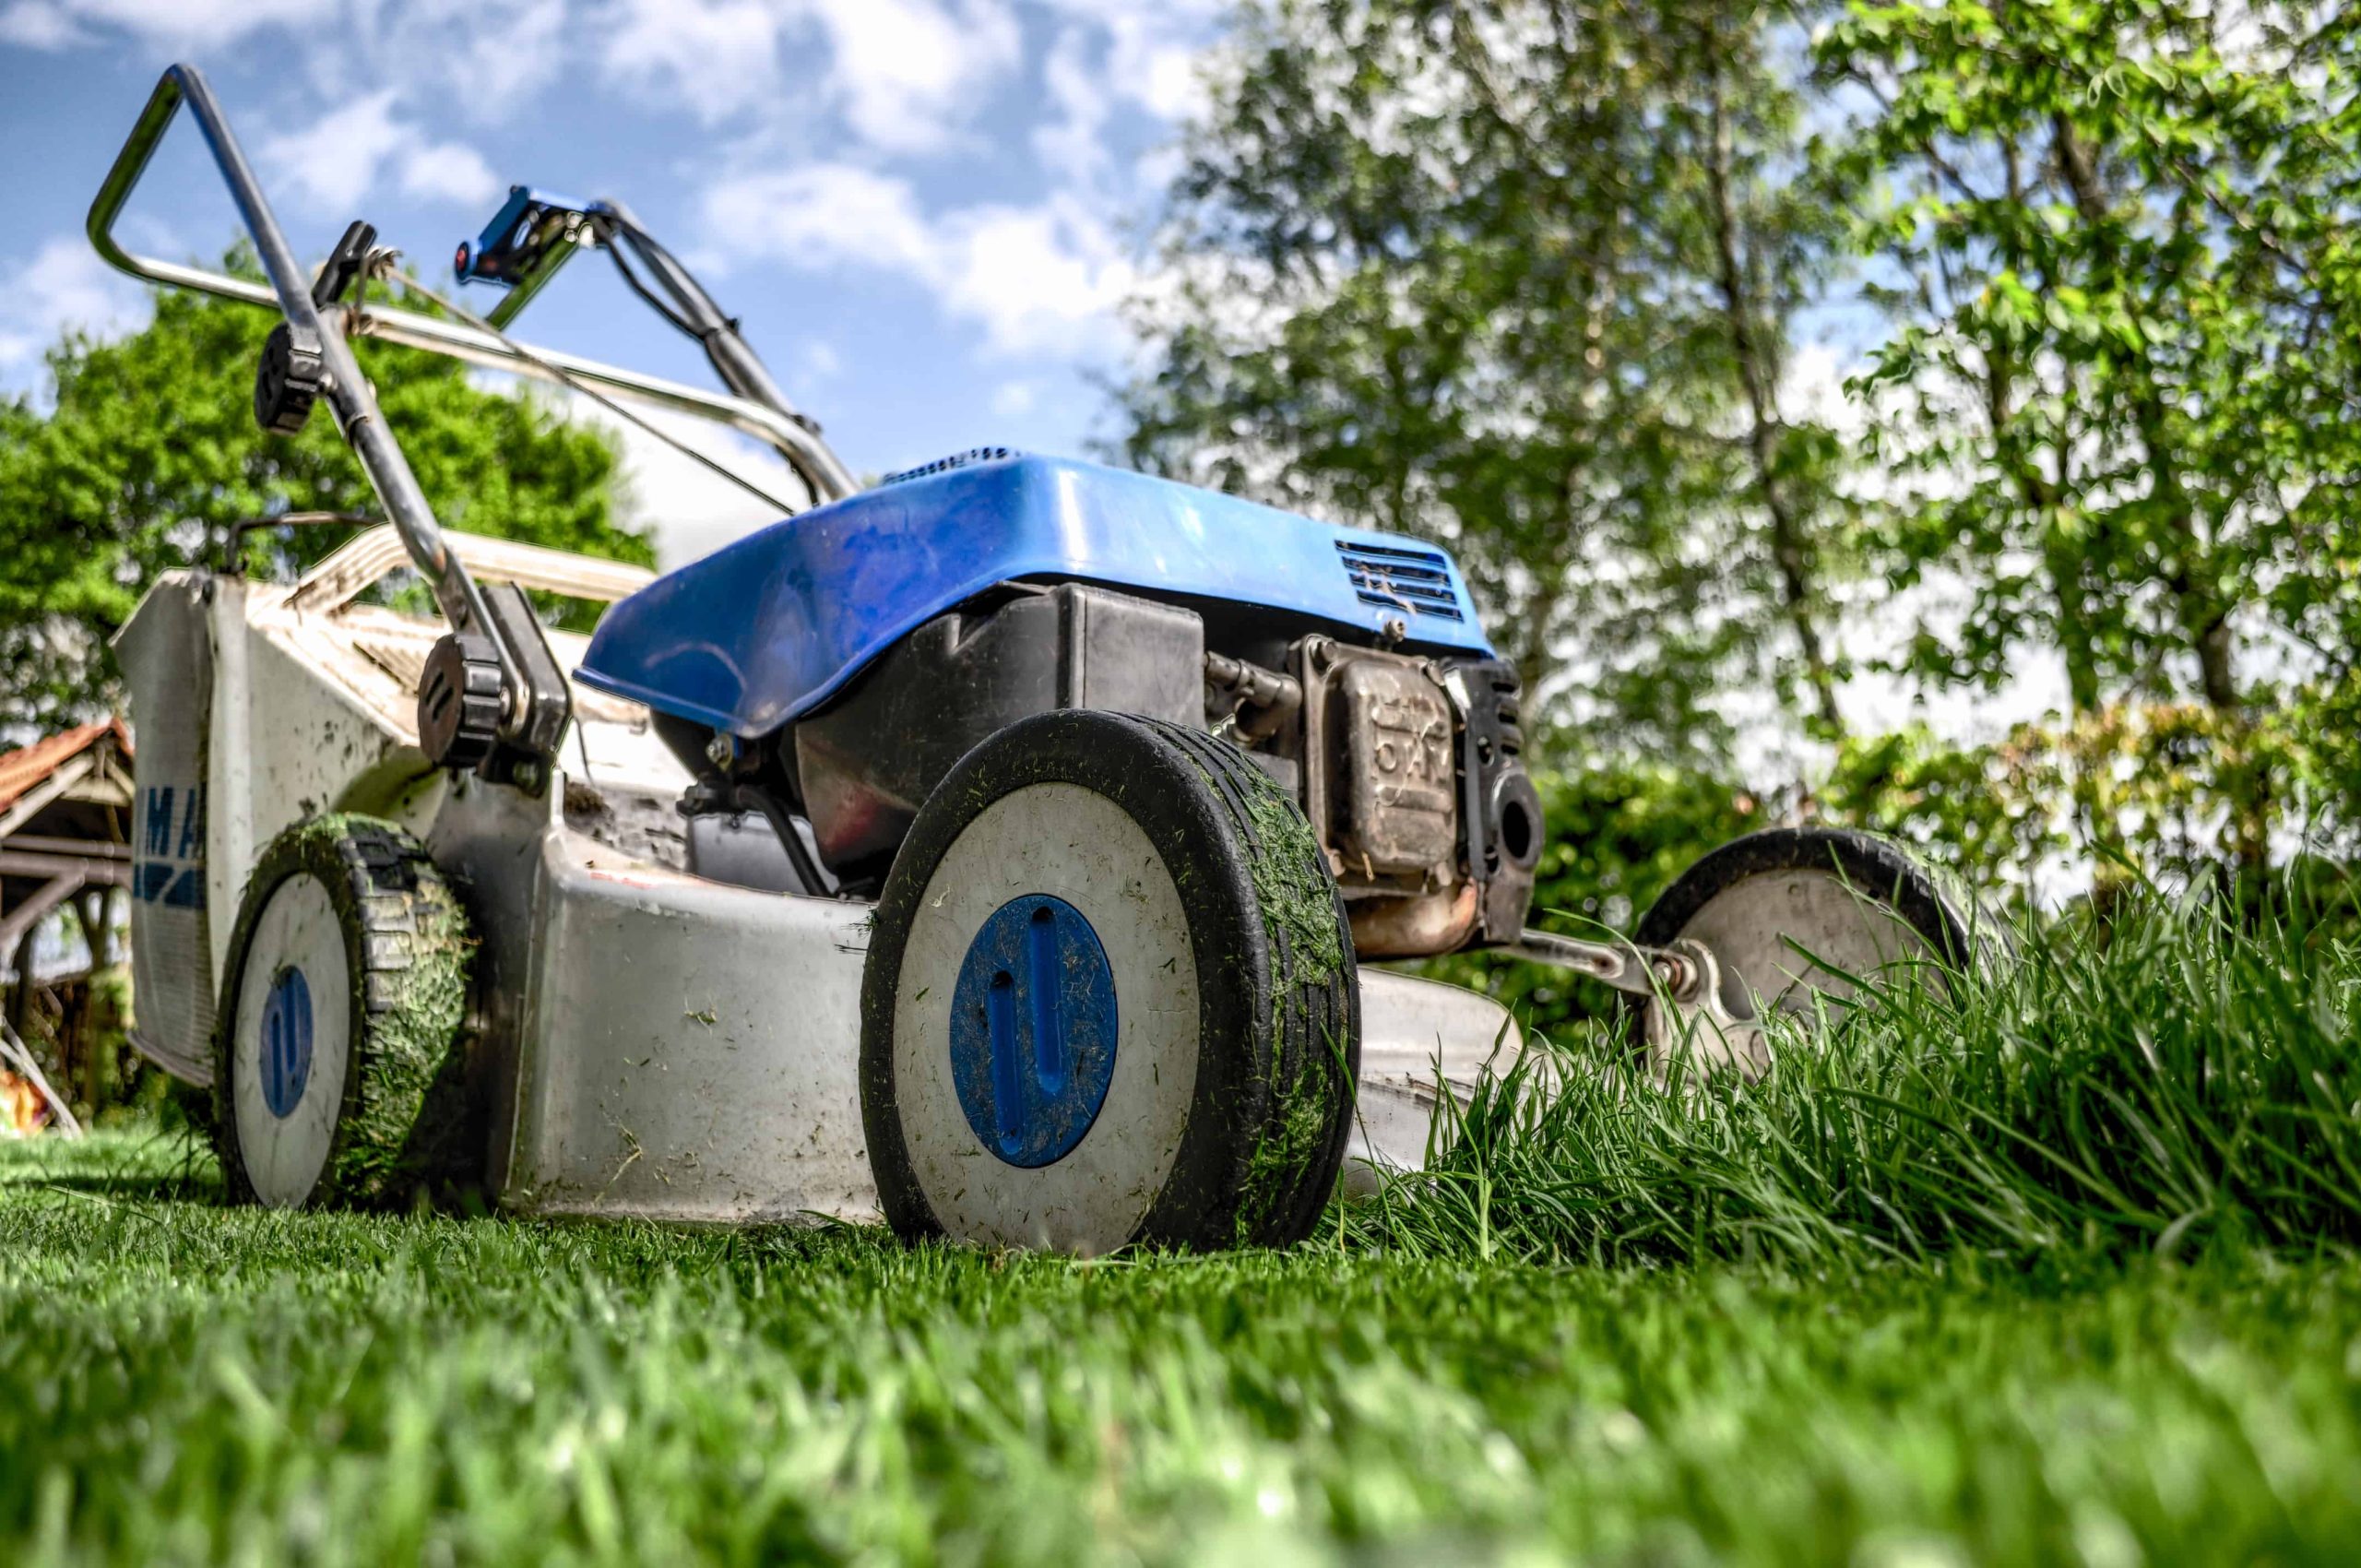 How to Start a (Stubborn) Lawn Mower: Gas or Electric